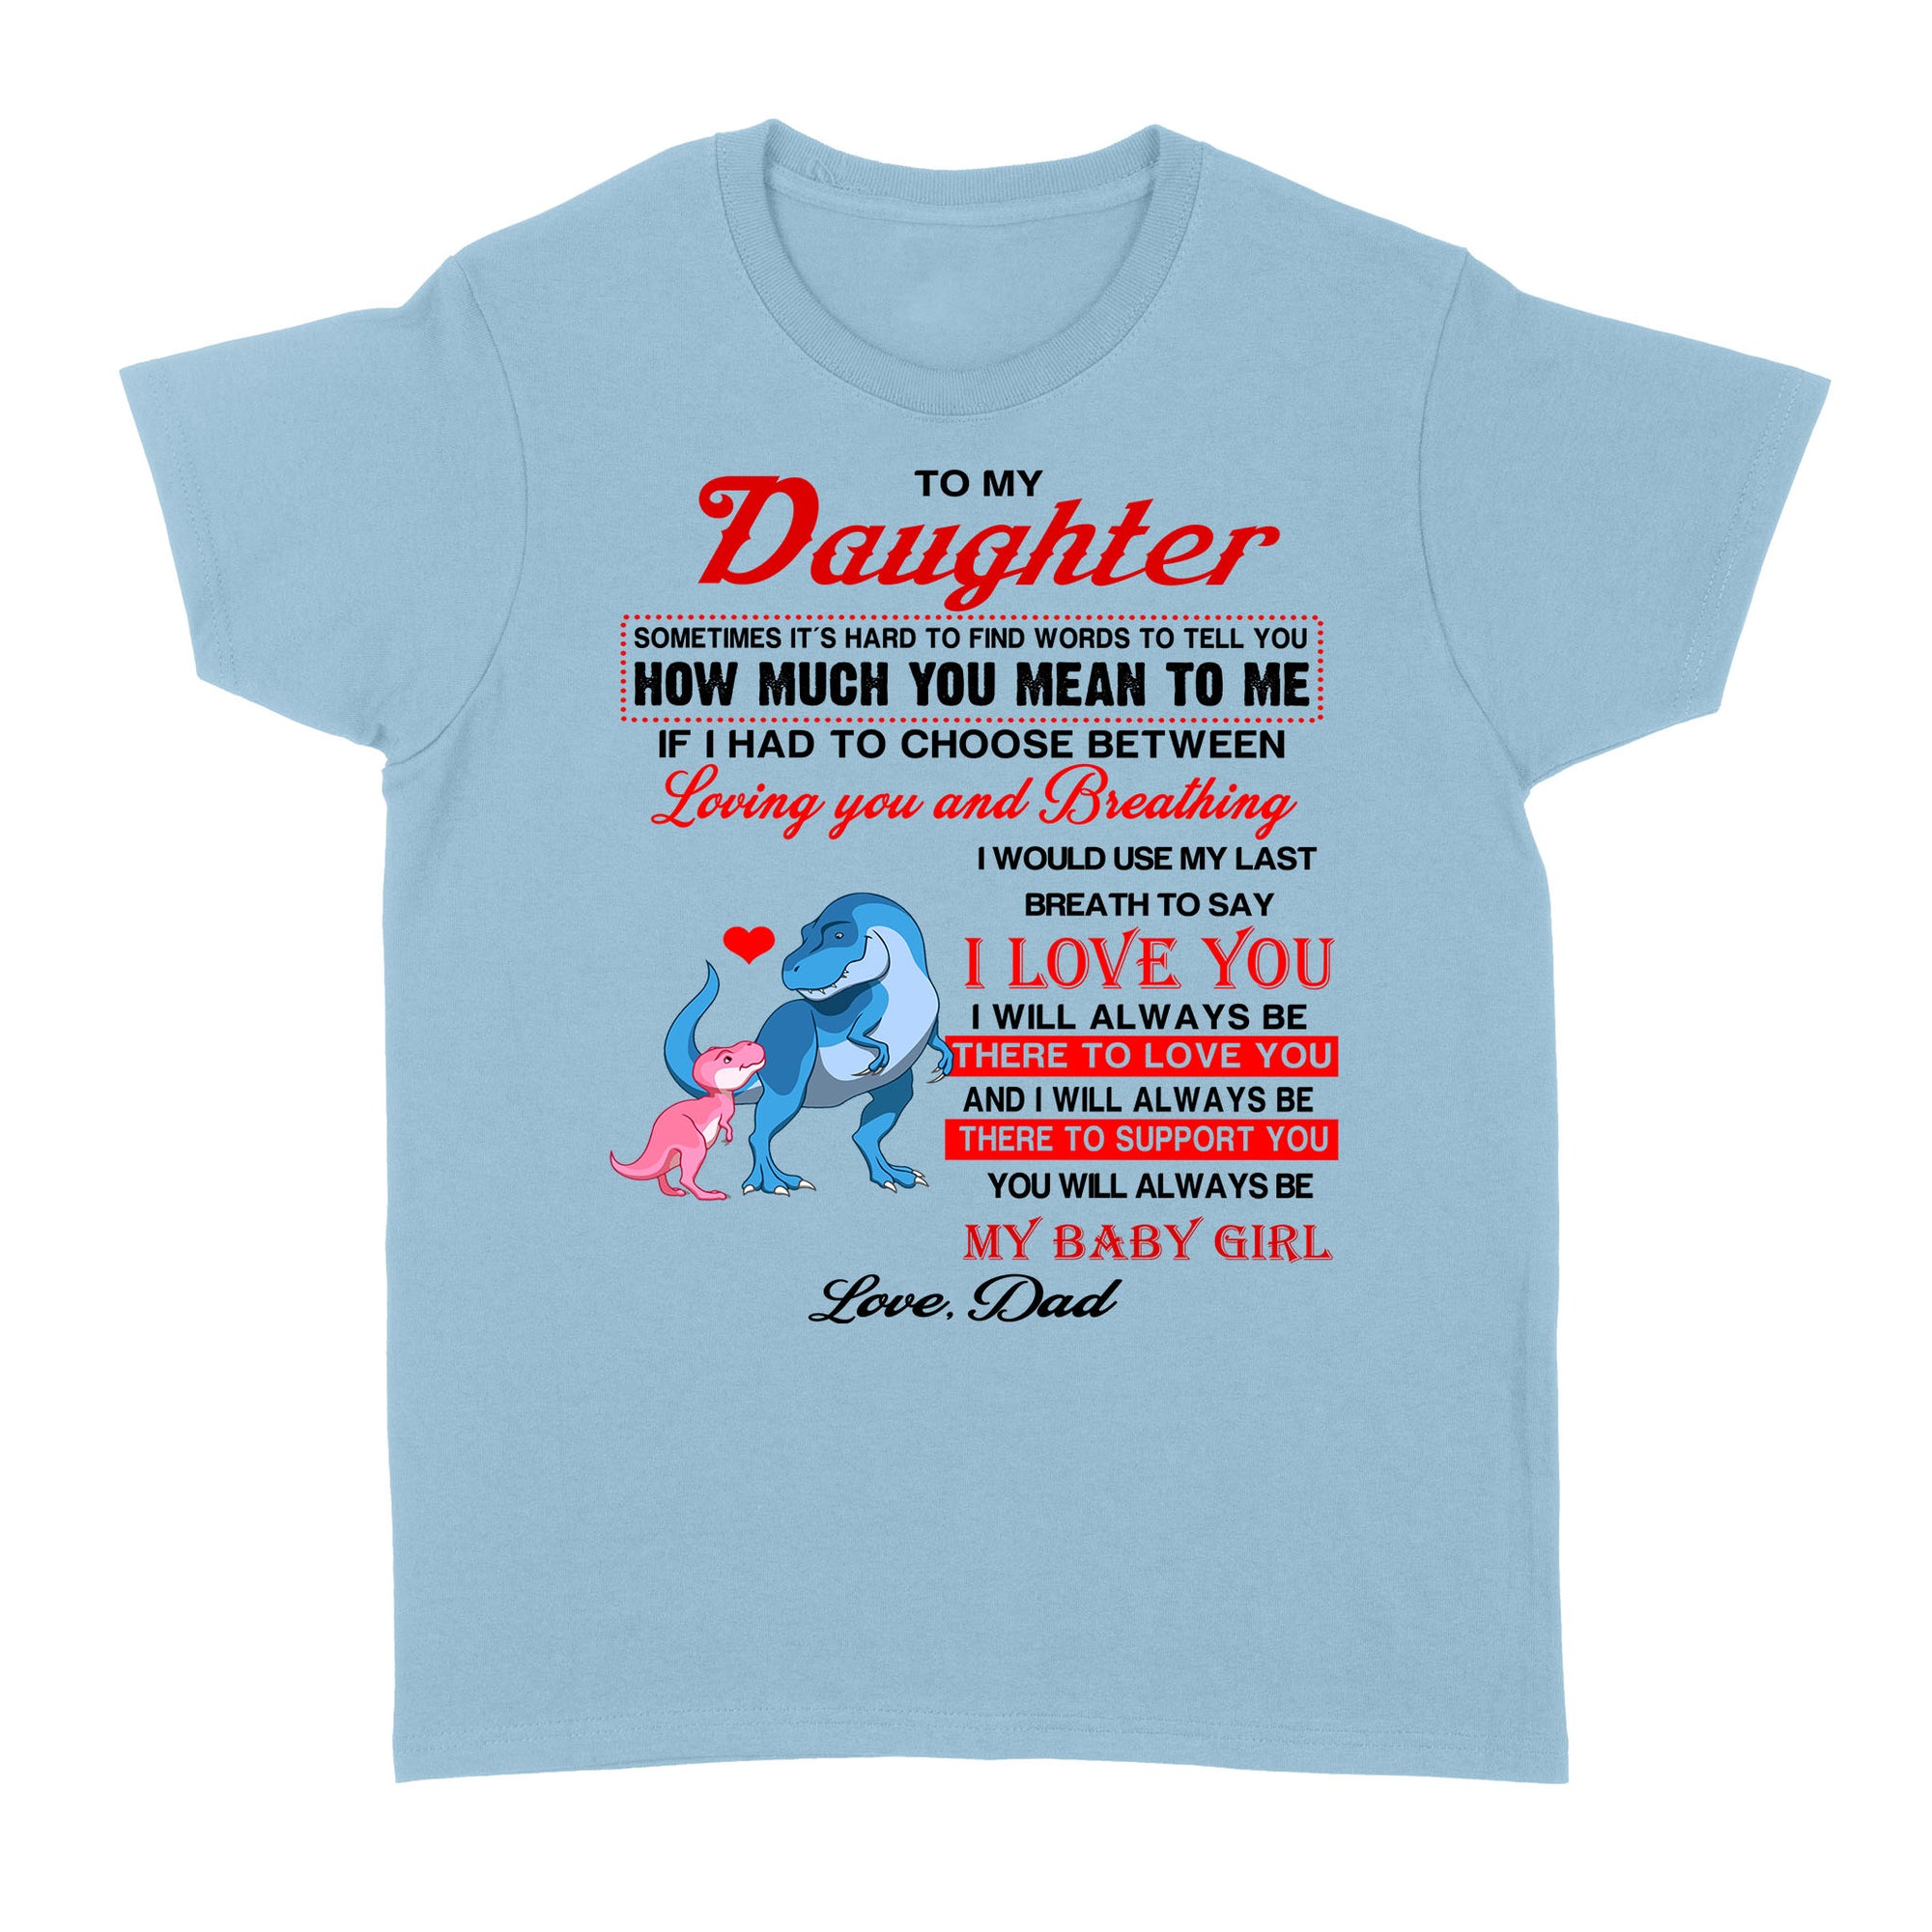 To My Daughter Sometimes It’s Hard To Find Words To Tell You How Much You Mean To Me, Dadysaurus - Standard Women's T-shirt